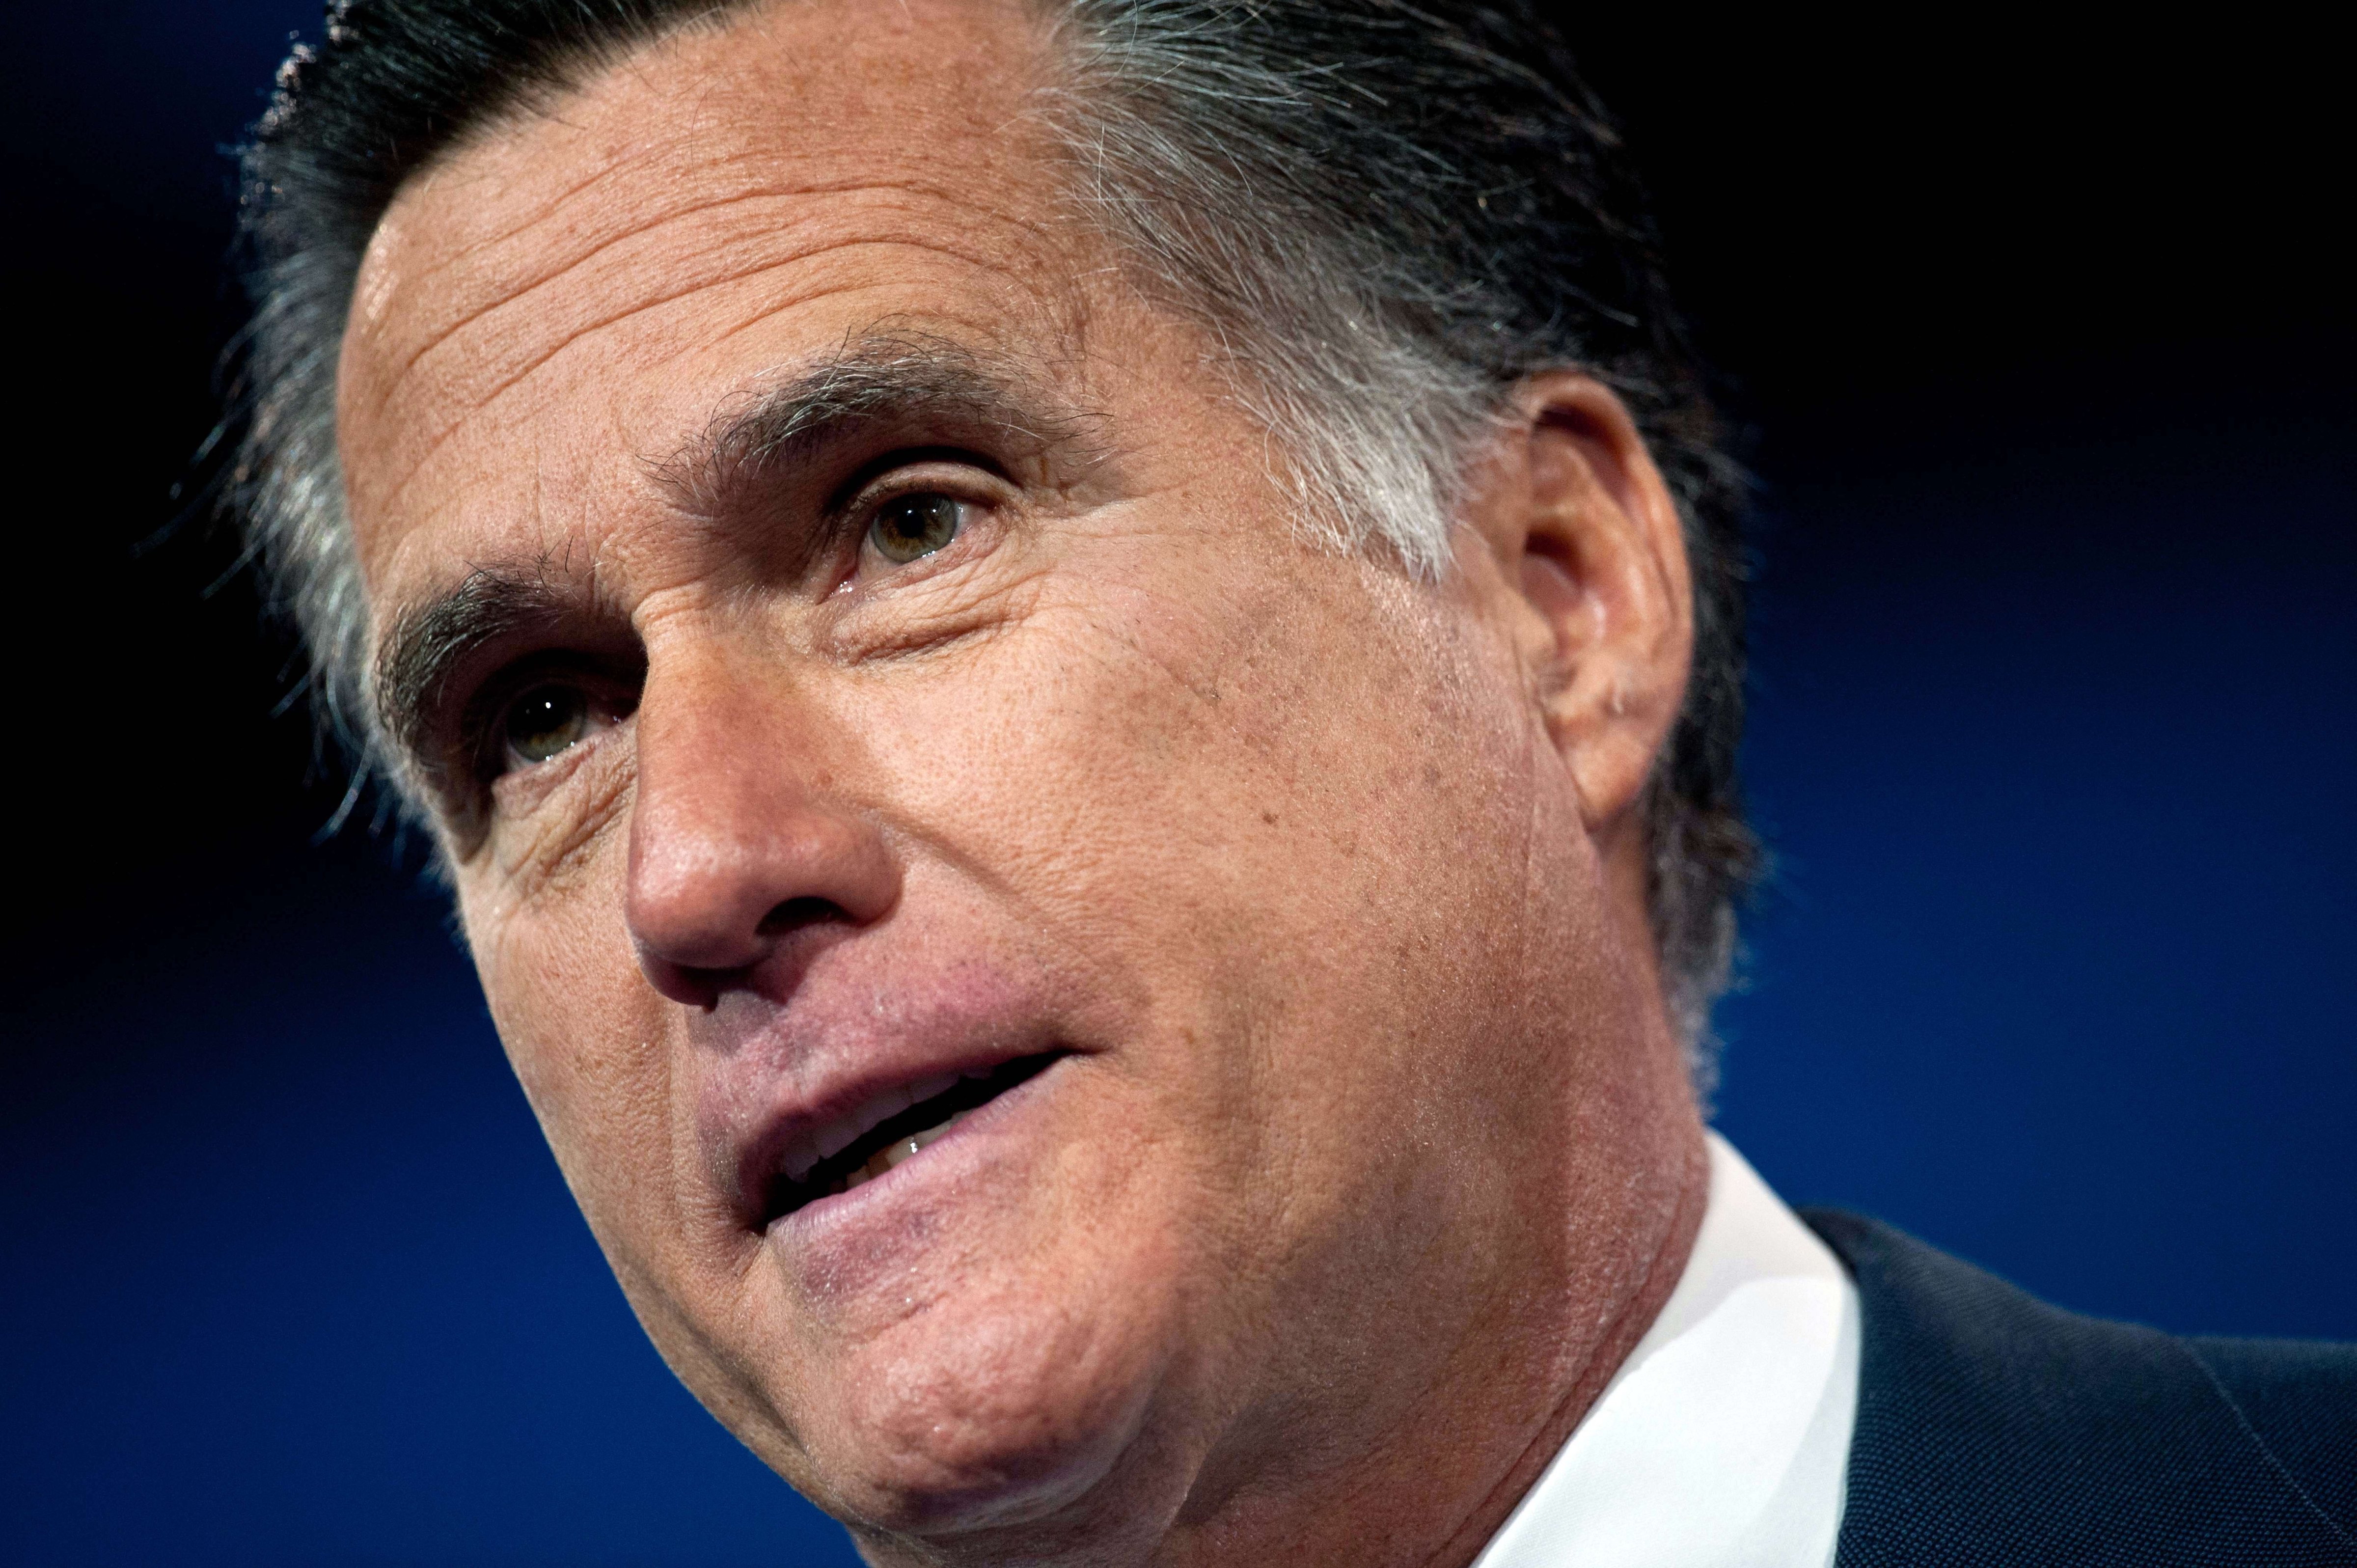 Former Republican presidential candidate Mitt Romney at the Conservative Political Action Conference (CPAC) in National Harbor, Maryland in 2013.